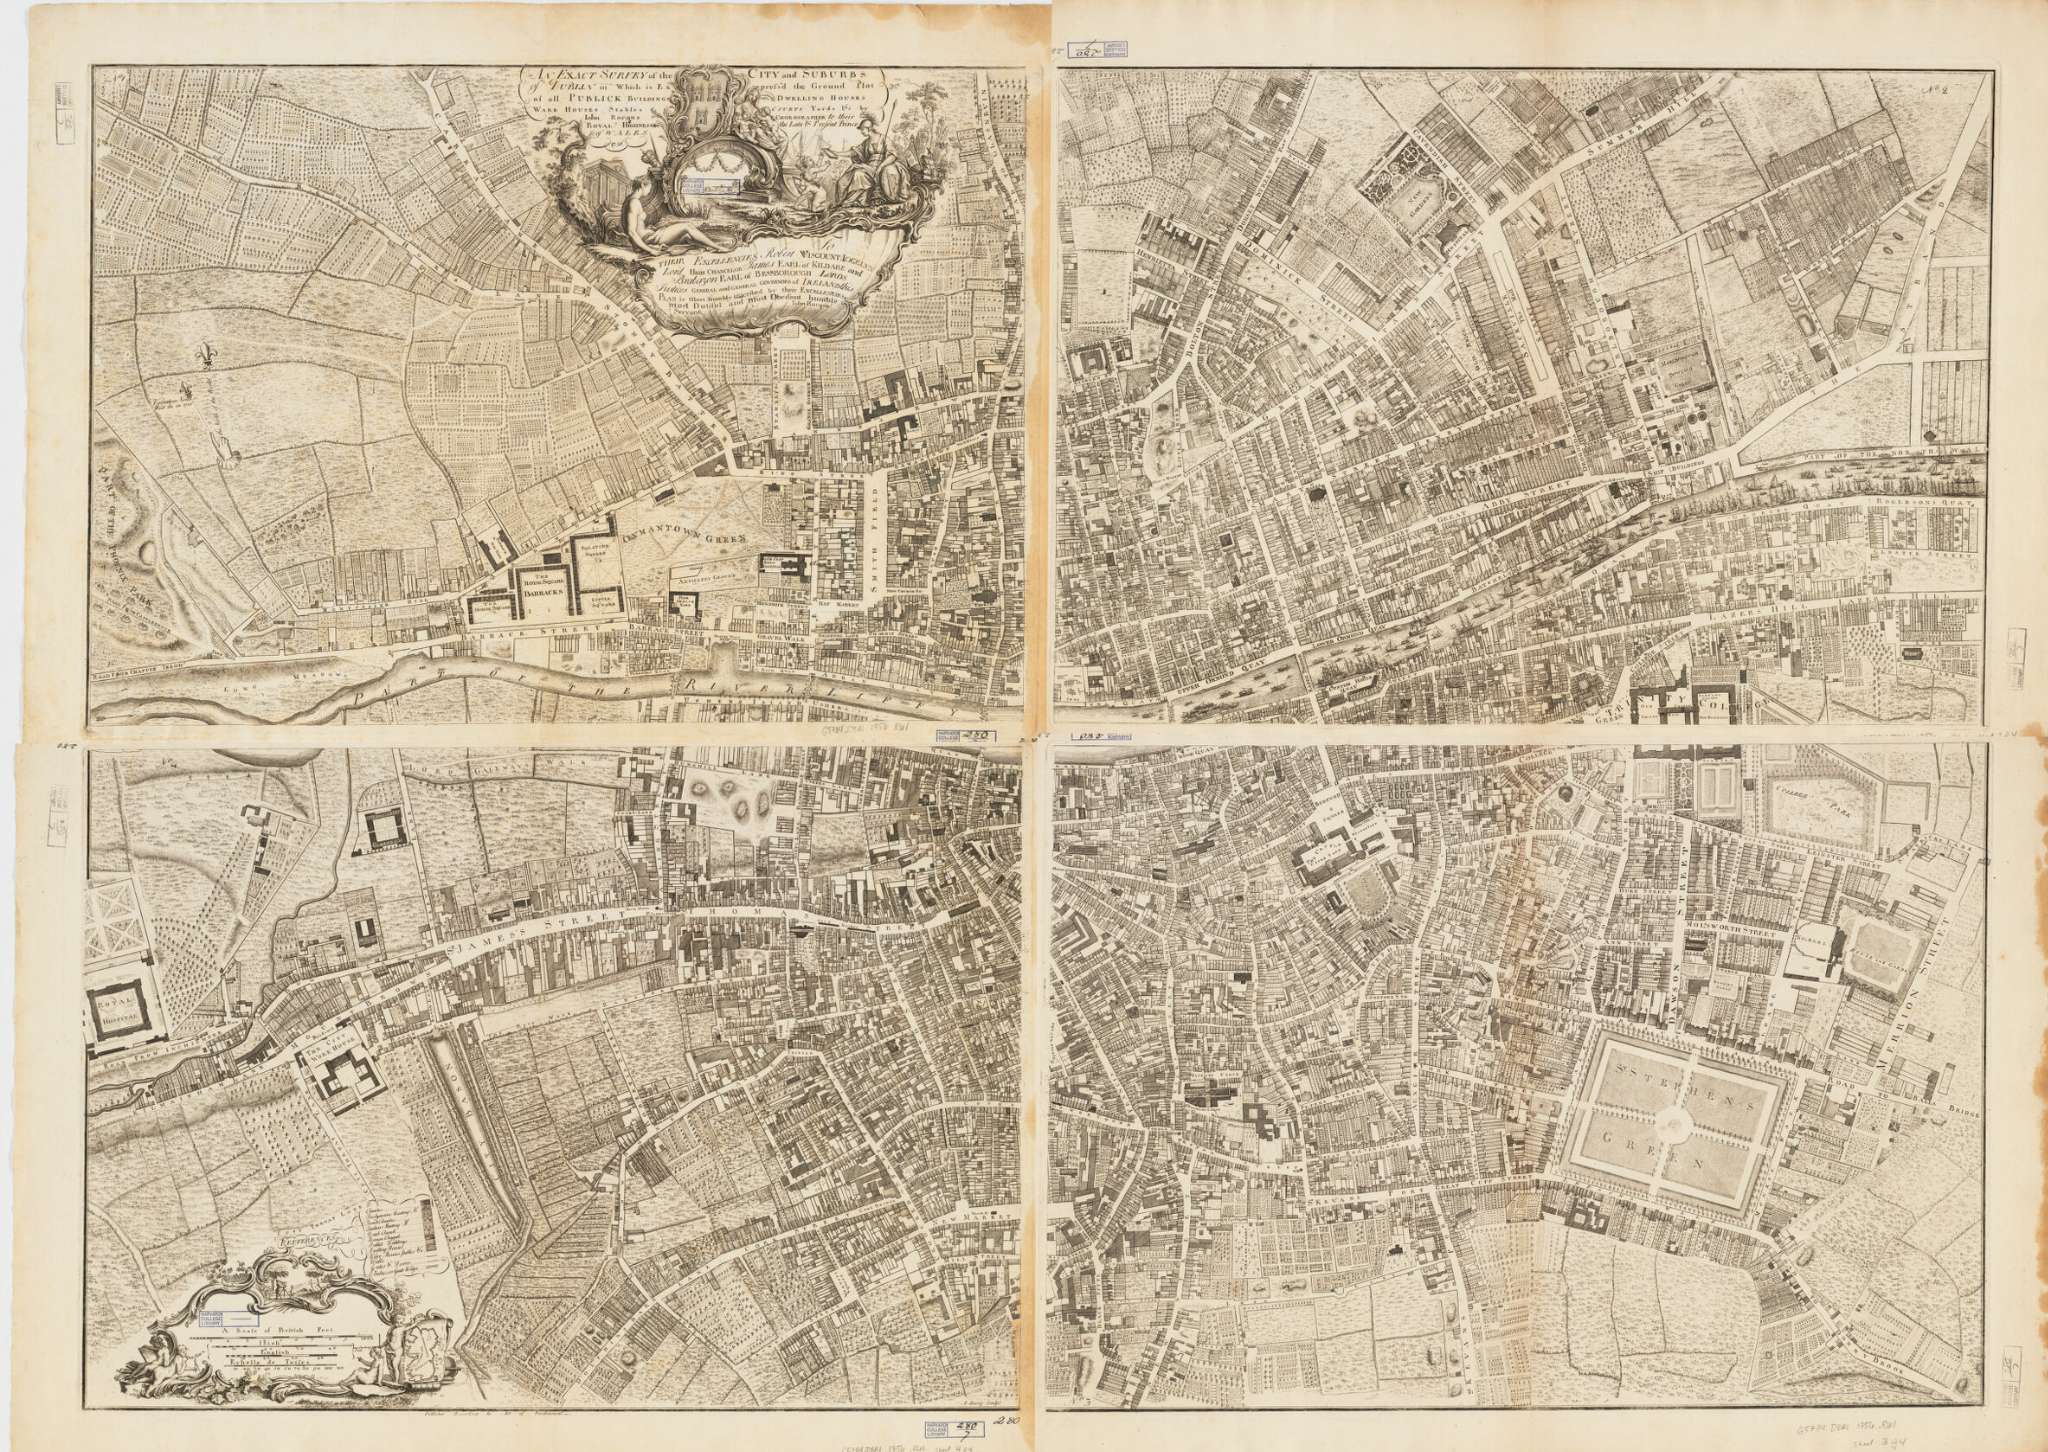 A map of Dublin from 1756.